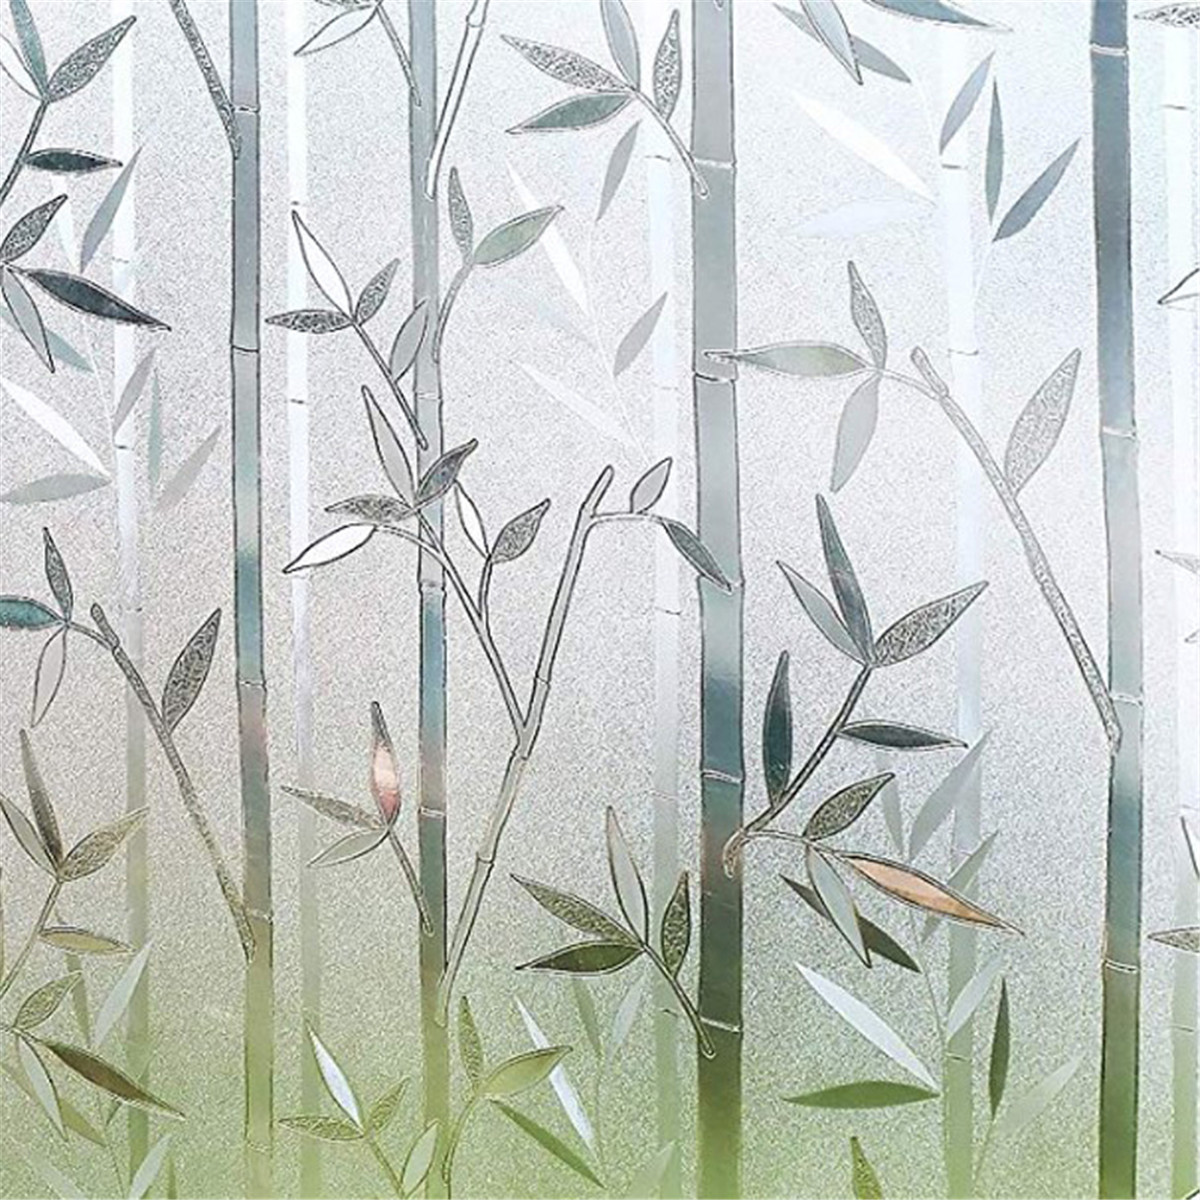 60-x-200cm-Waterproof-PVC-Frosted-Glass-Window-Film-Cover-Window-Privacy-Bedroom-Bathroom-Self-Adhes-1807465-3